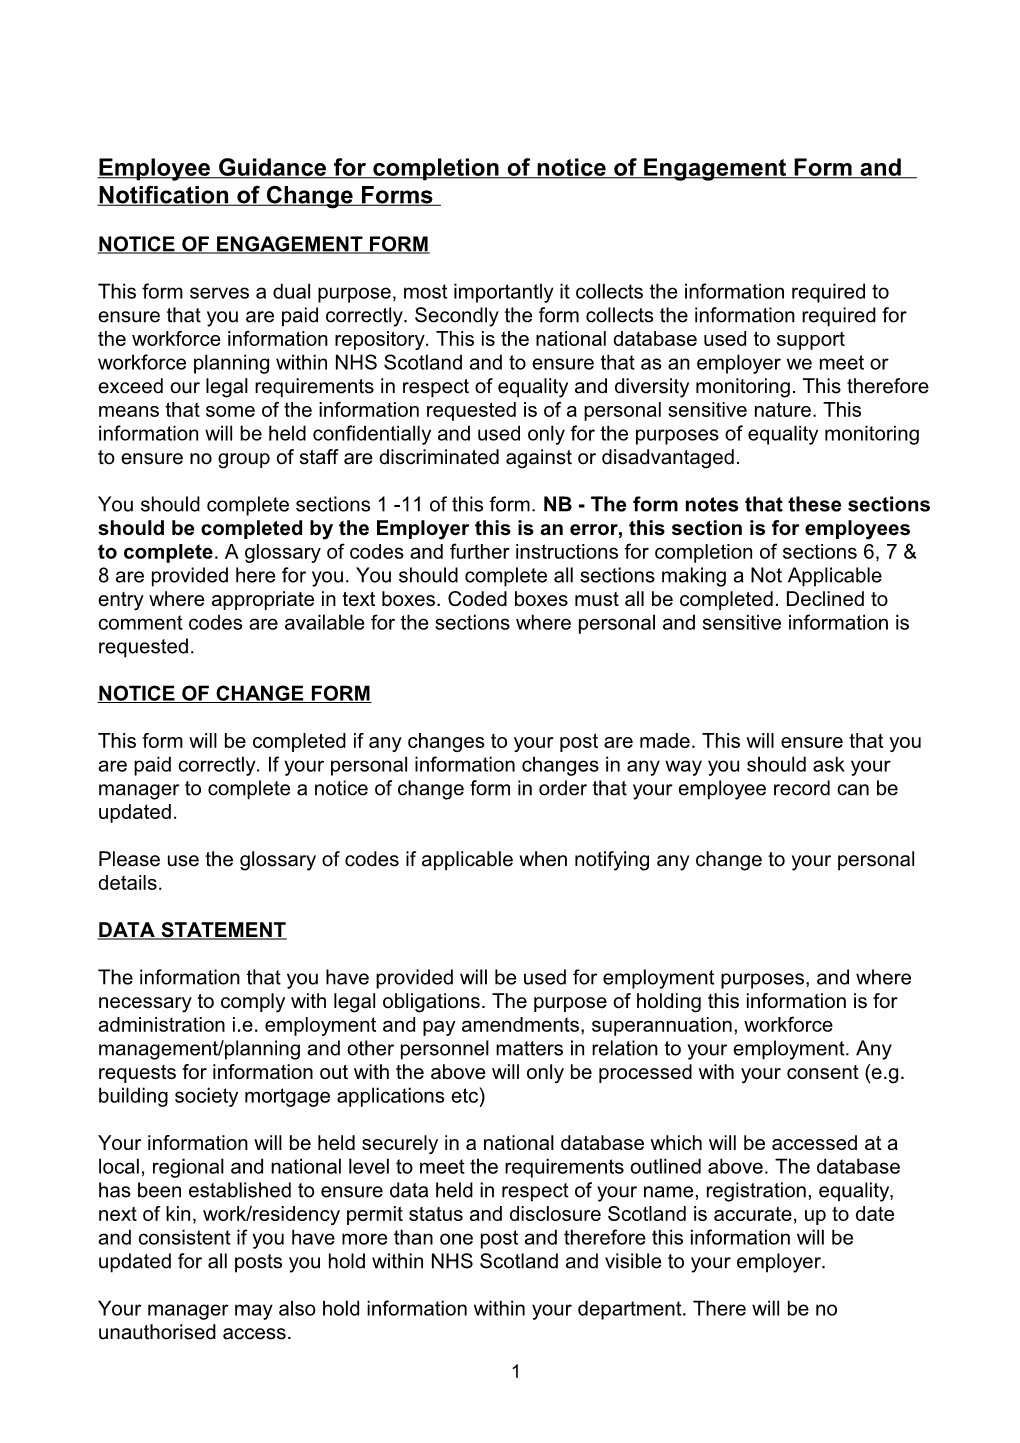 Employee Guidance for Completion of Notice of Engagement Form and Notification of Change Forms